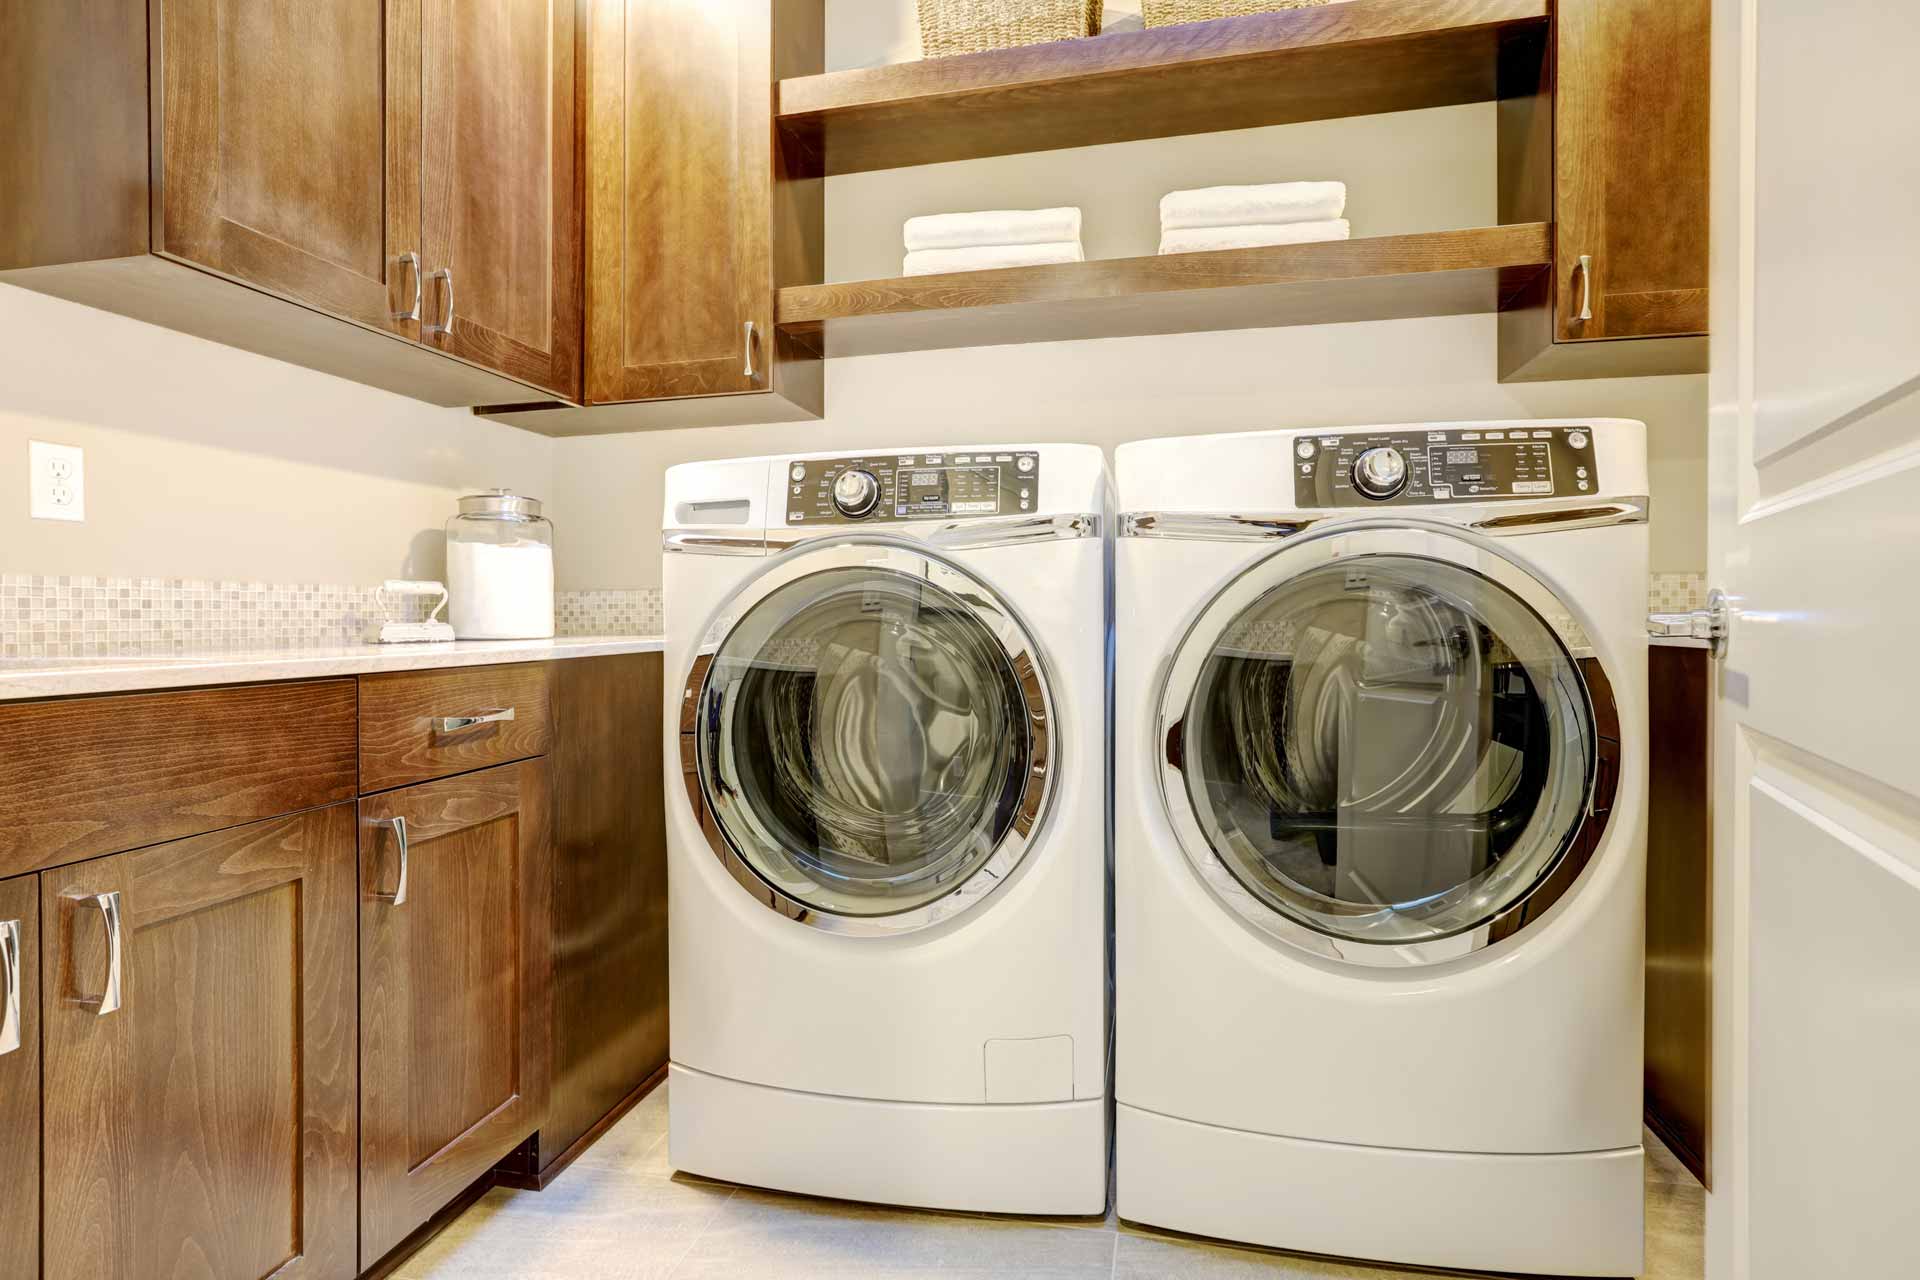 Washer and dryer in clean, organized laundry room